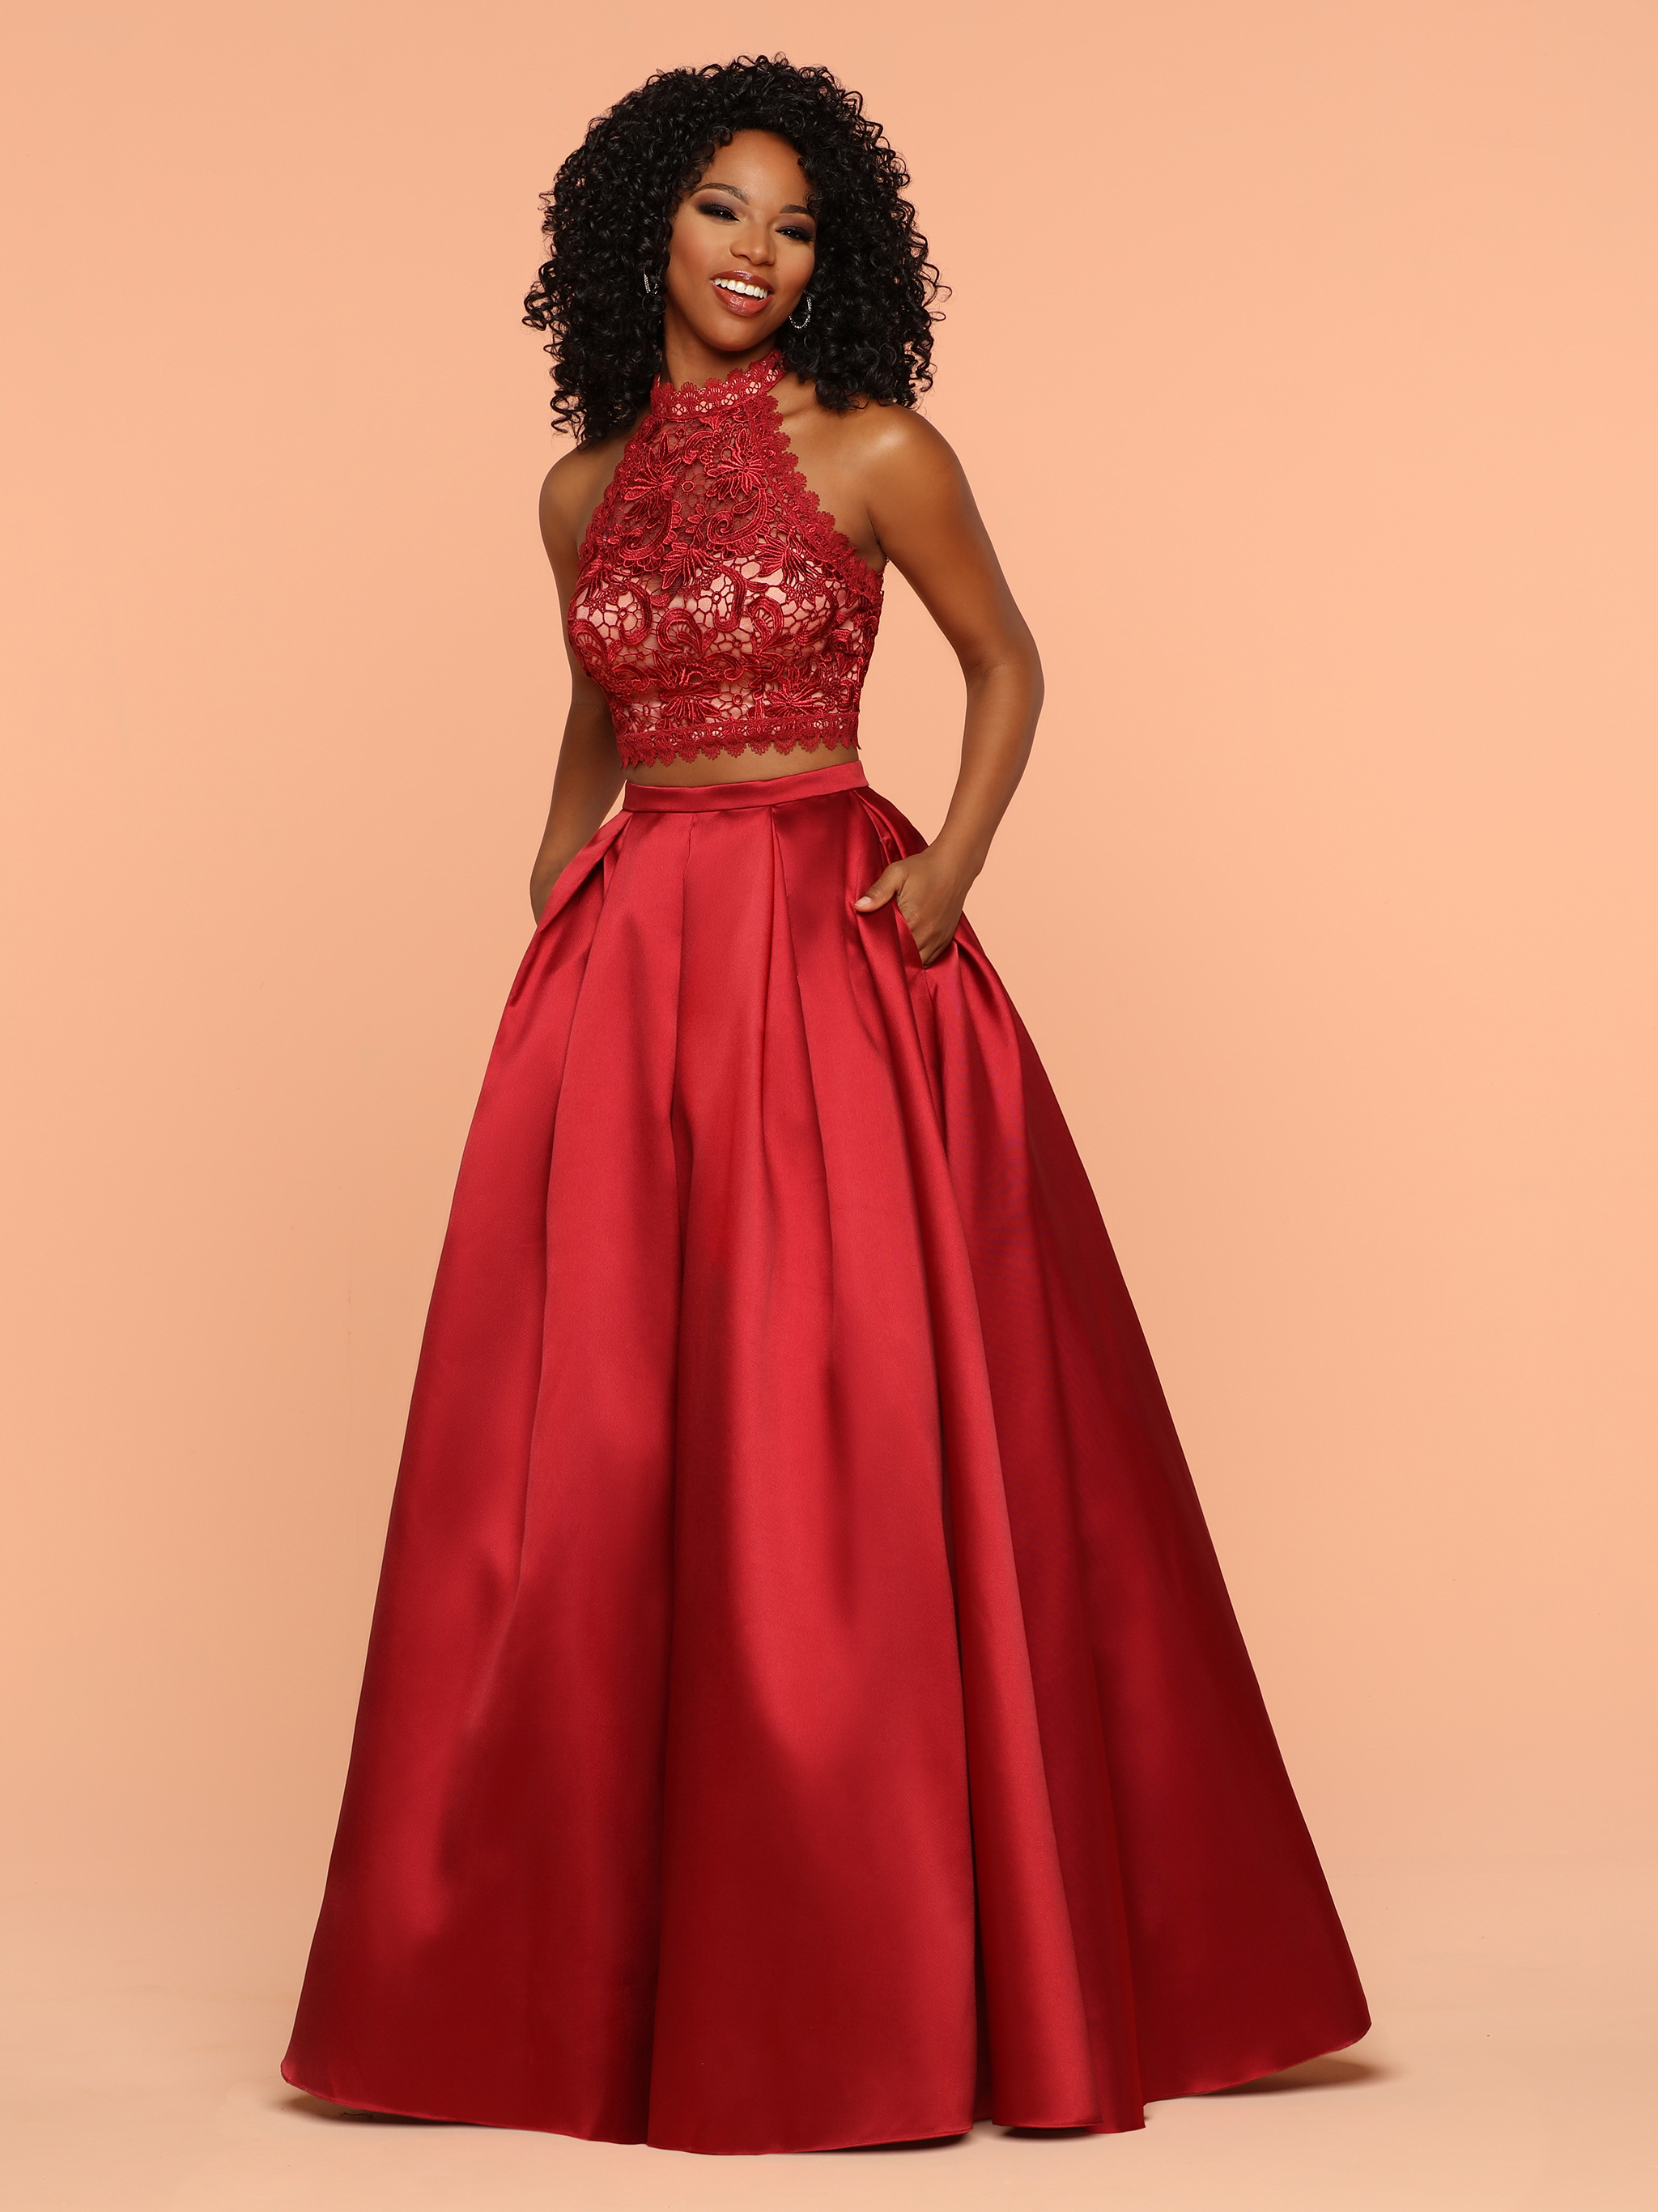 African Black Girl Prom Dresses Long Mermaid Style 2018 Sexy V Neck Long  Sleeve Red Sequins Sweep Train Evening Gowns Special Occasion, 275 ·  daisydress · Online Store Powered by Storenvy